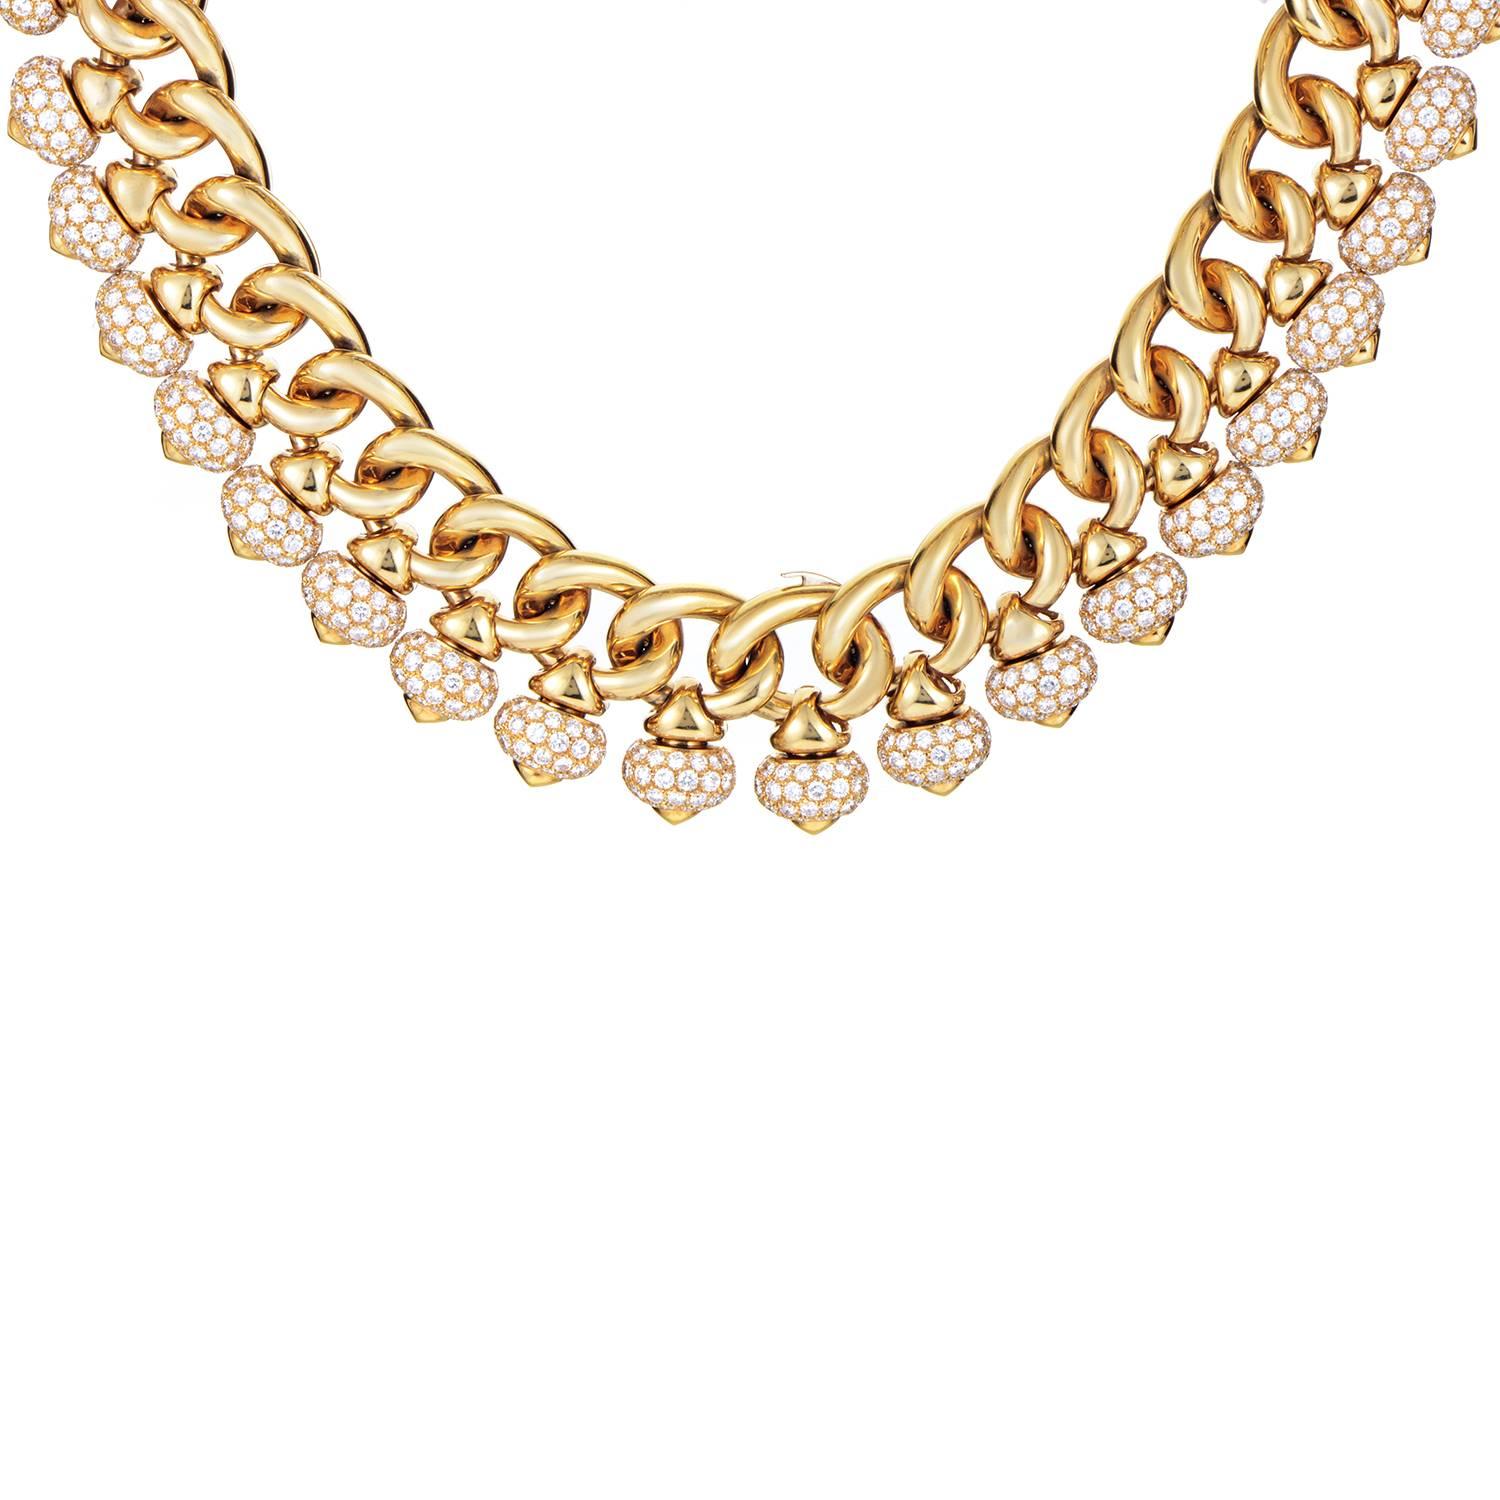 A bold statement of prestige and class, this astonishing necklace from Bulgari is a magnificent piece that exudes sheer luxury through the alluring radiance of 18K yellow gold and glamorous brilliance of diamonds amounting approximately to 45.00